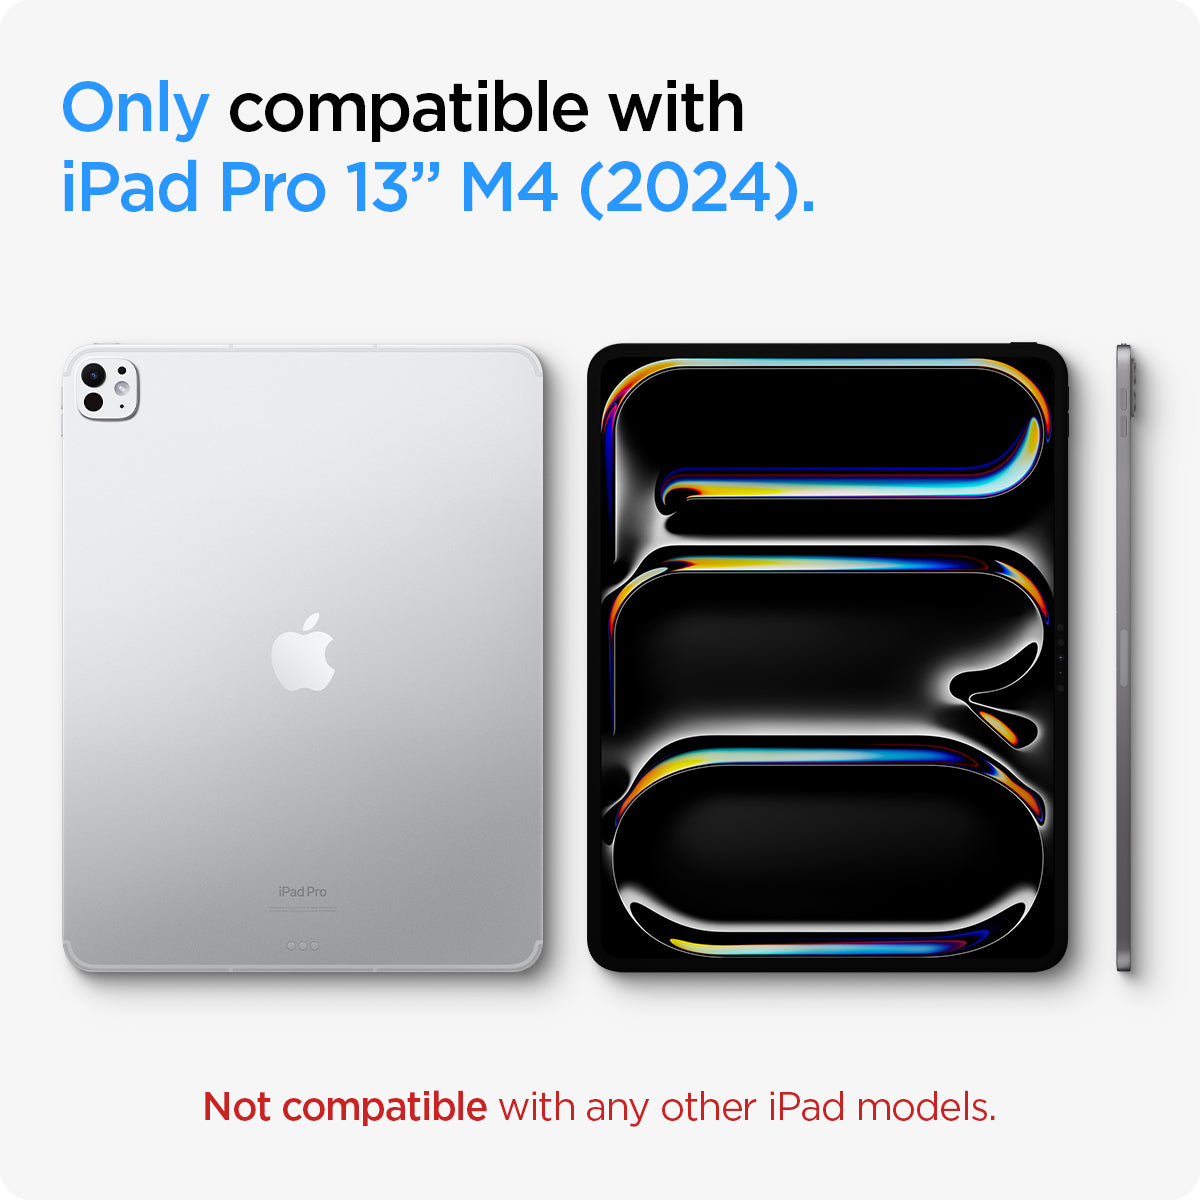 AGL07793 - Only compatible with iPad Pro 13" M4 (2024). Not compatible with any other iPad models.